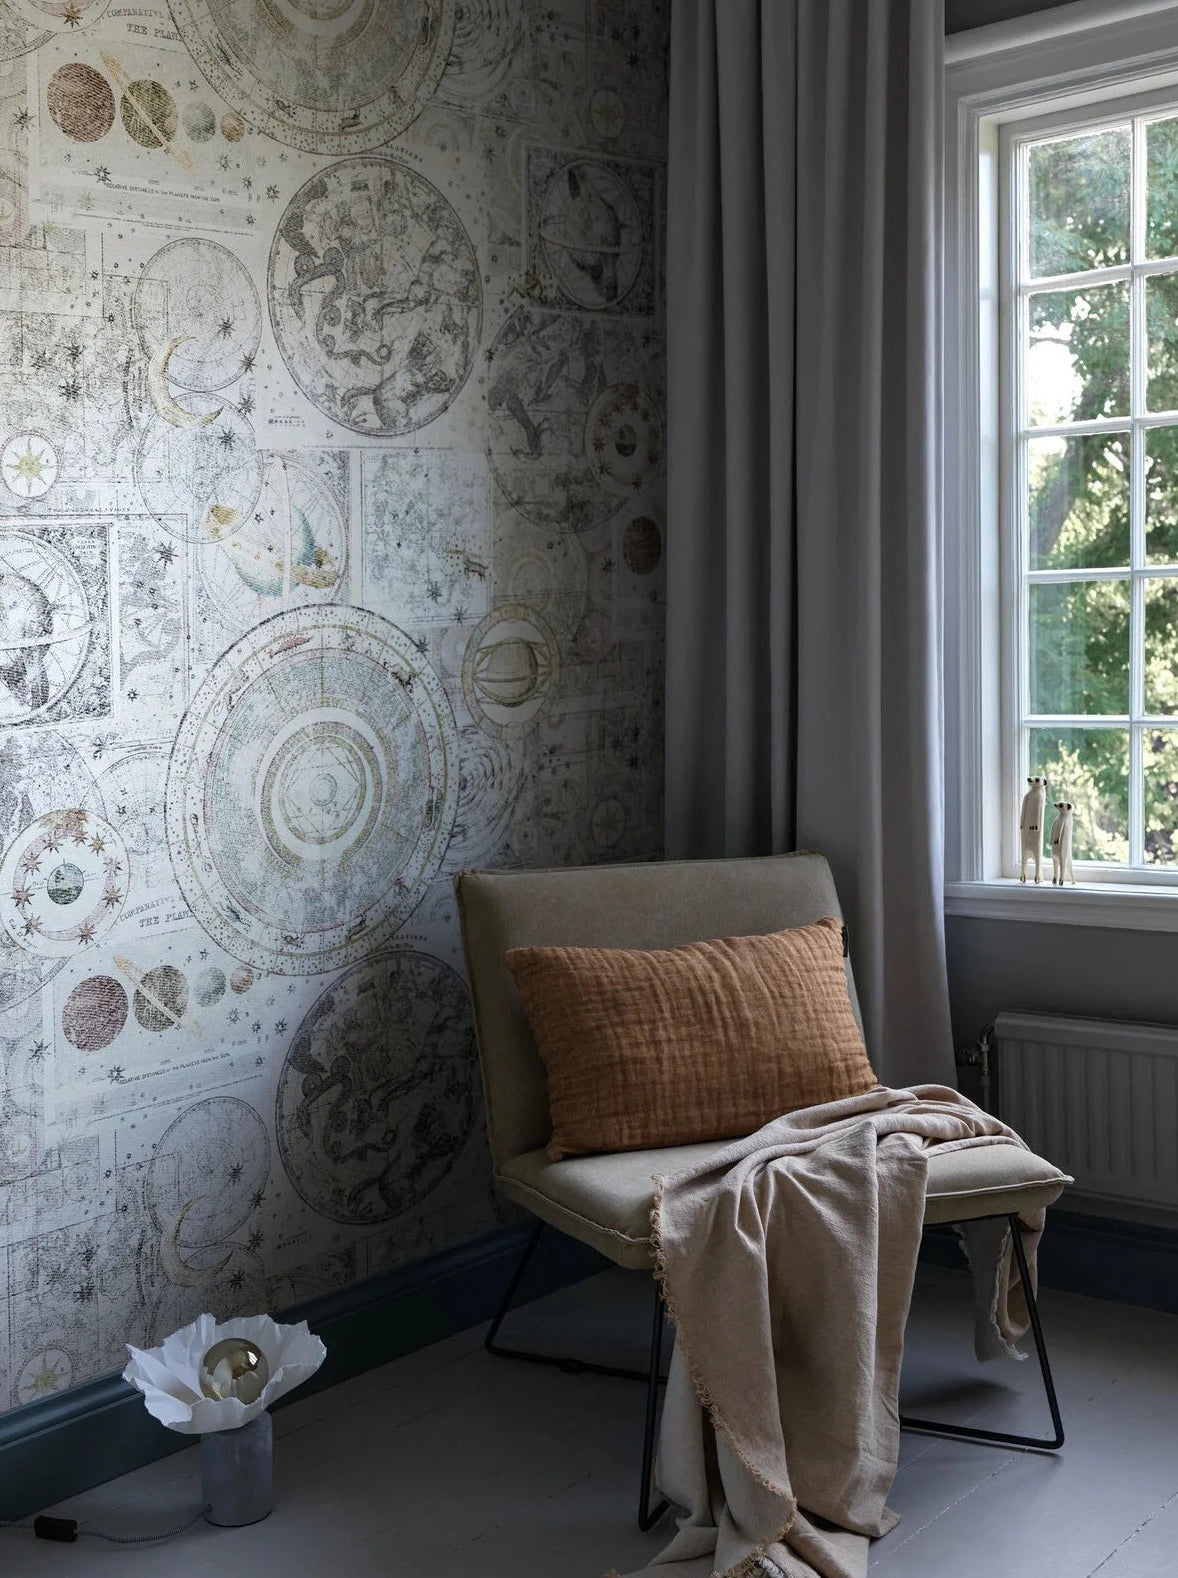 This immersive wallpaper comes with a lovely vintage feel